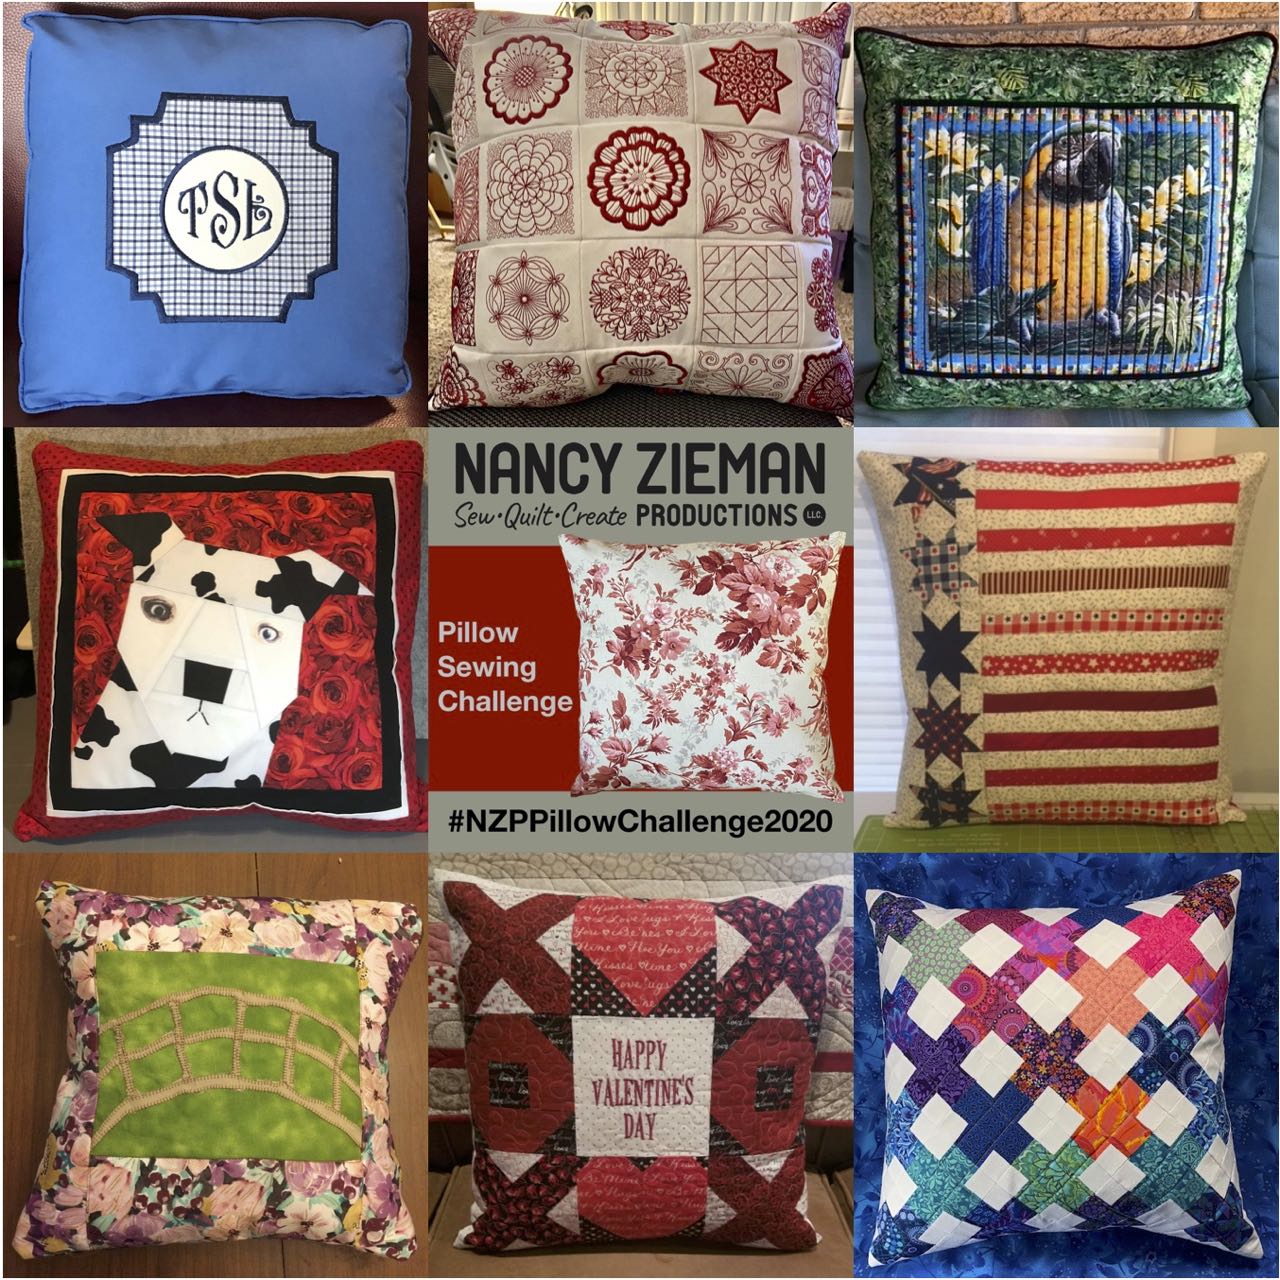 2020 NZP Pillow Sewing Challenge Winners  Announced